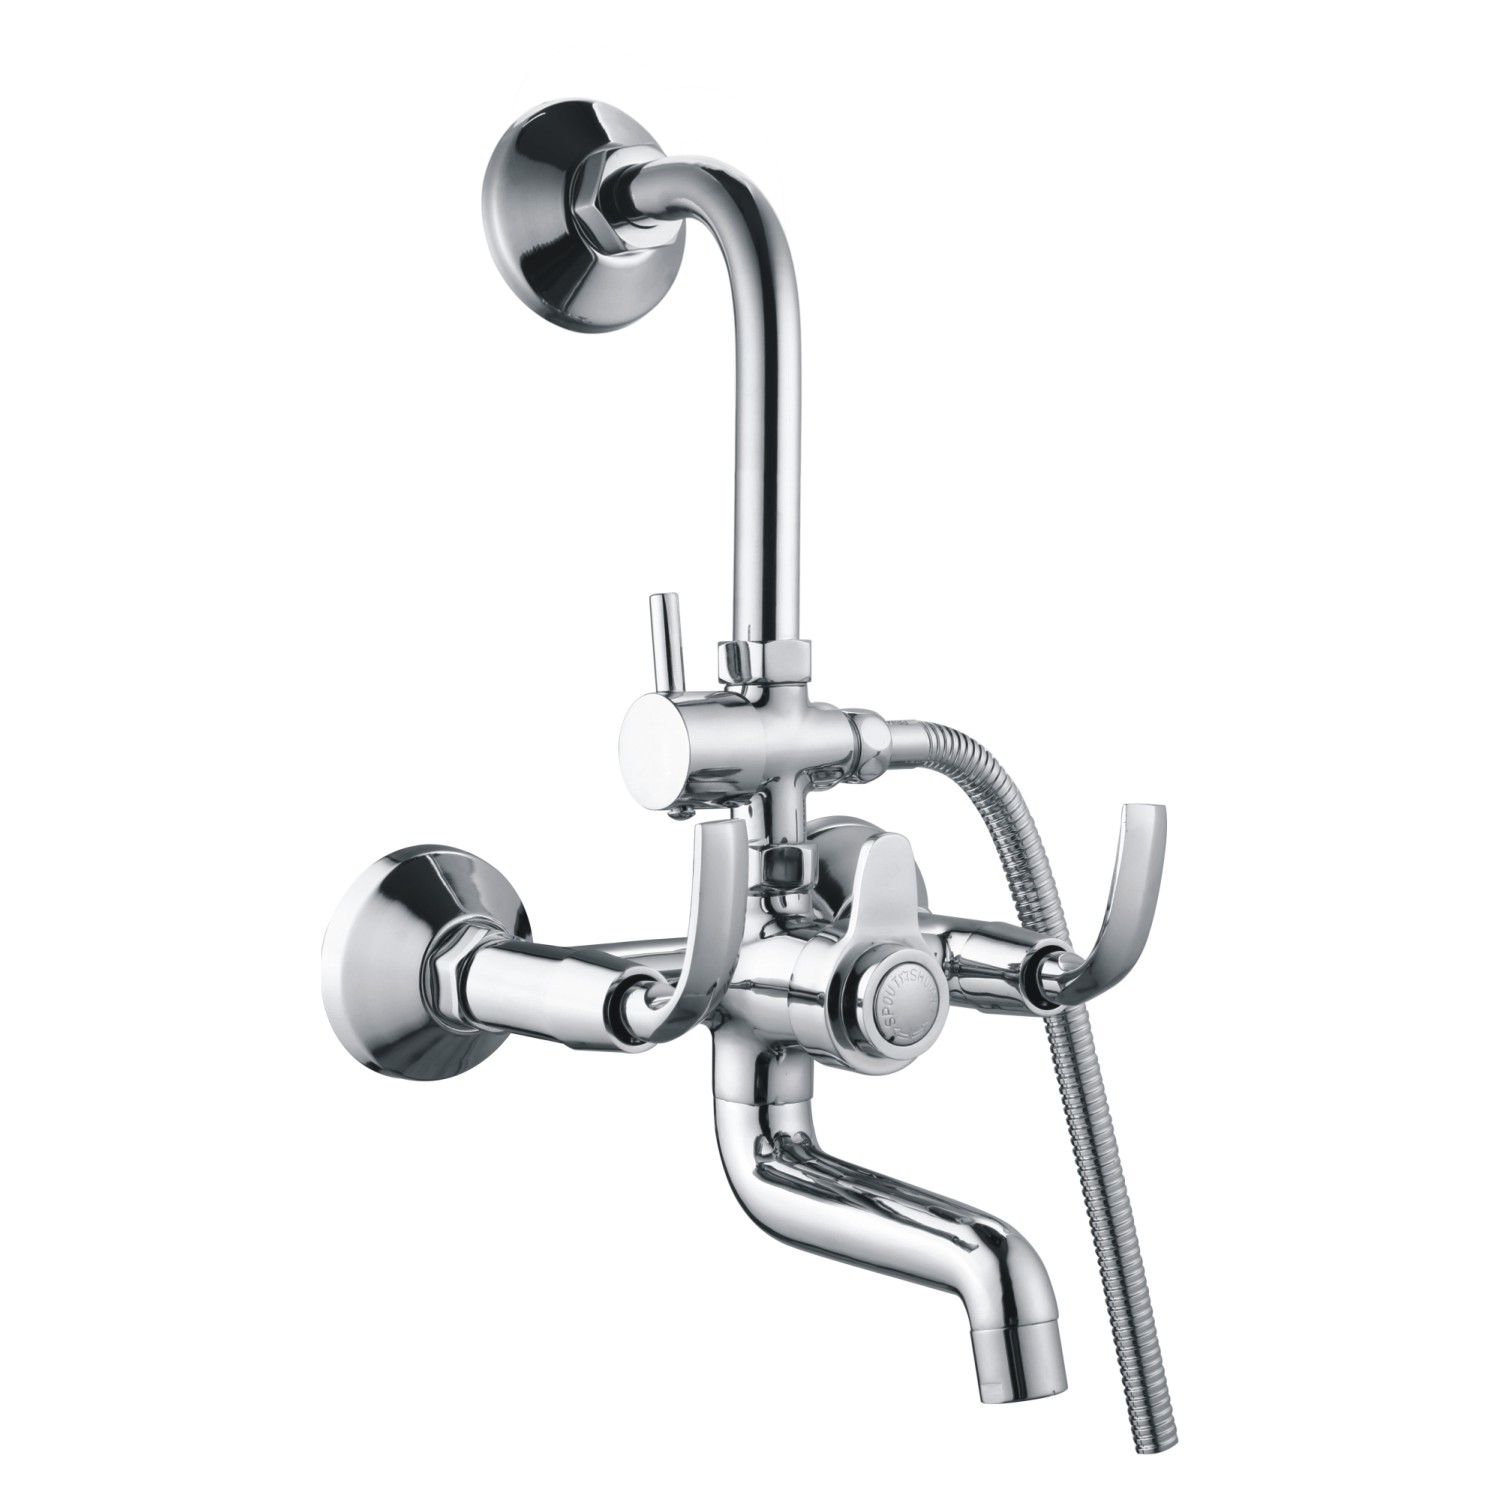 C.P WALL MIXER 3 IN 1 SYSTEM WITH L BEND SET 